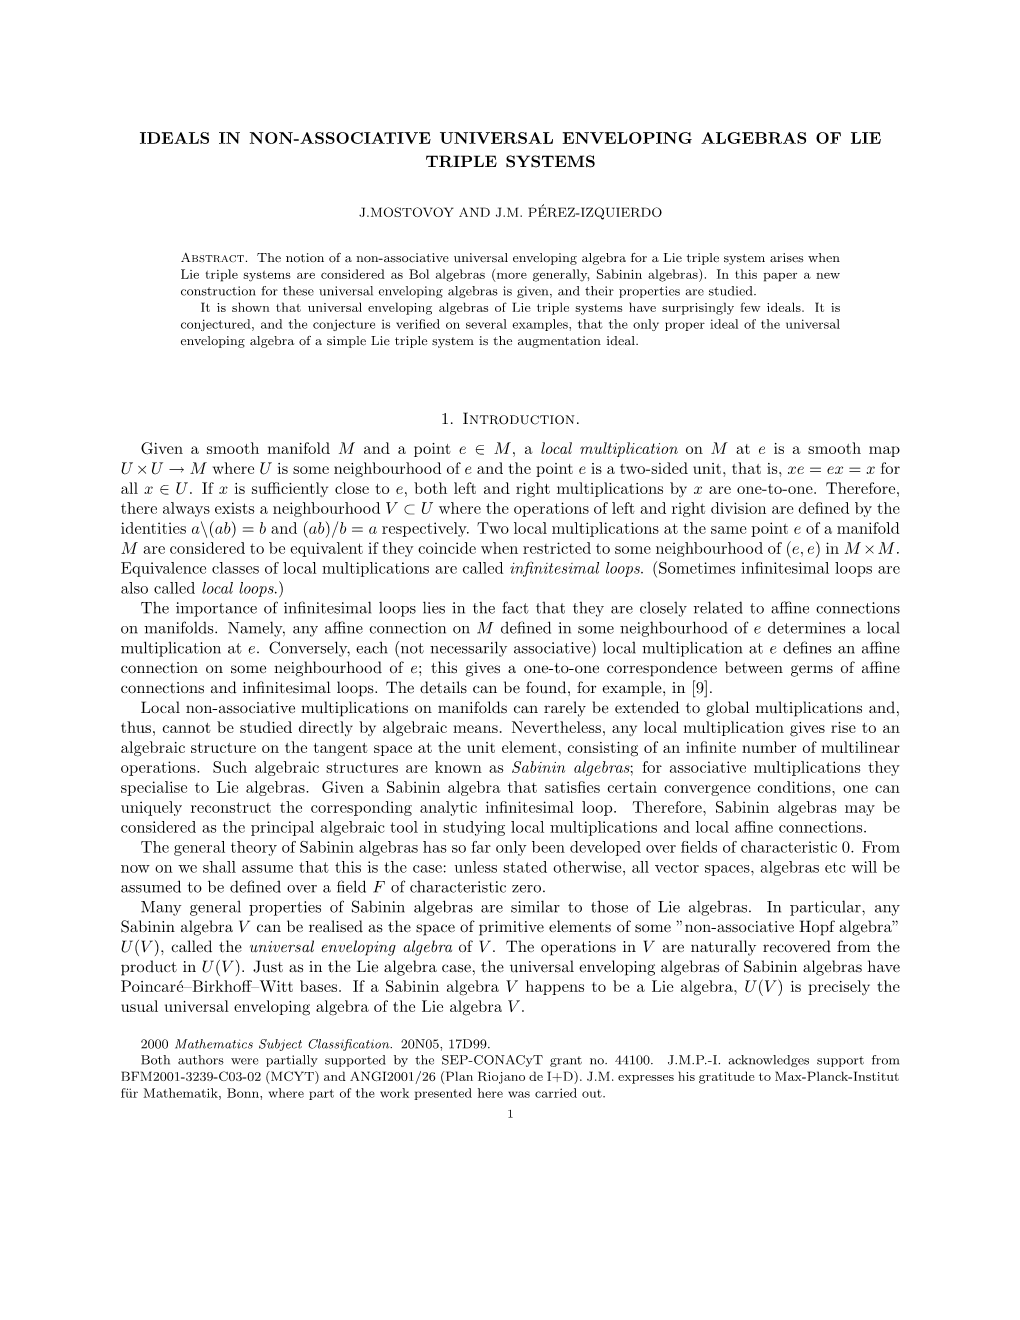 Ideals in Non-Associative Universal Enveloping Algebras of Lie Triple Systems